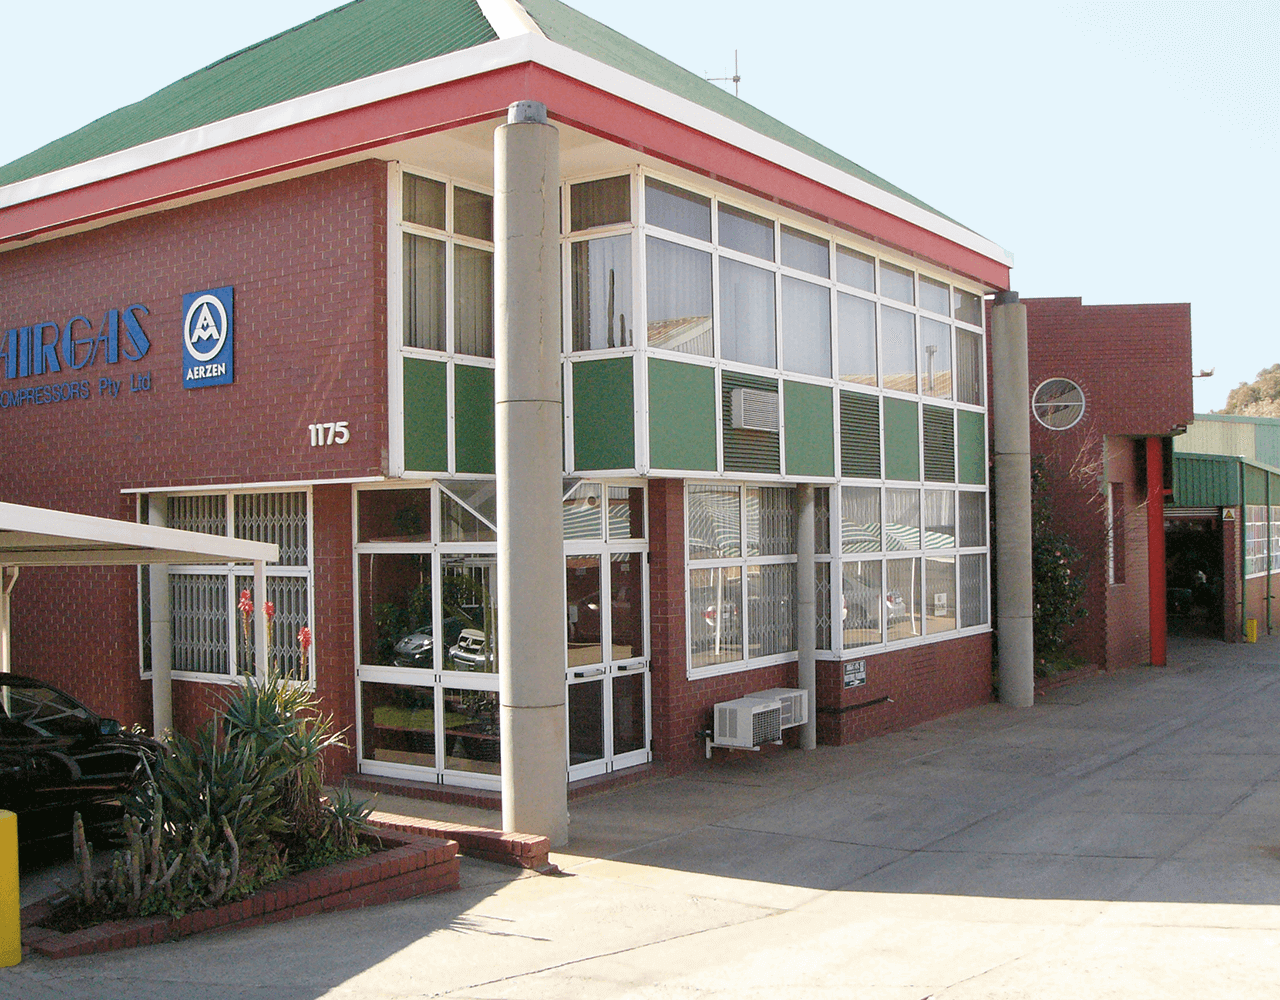 Picture of the building of the Airgas Compressor in South Africa